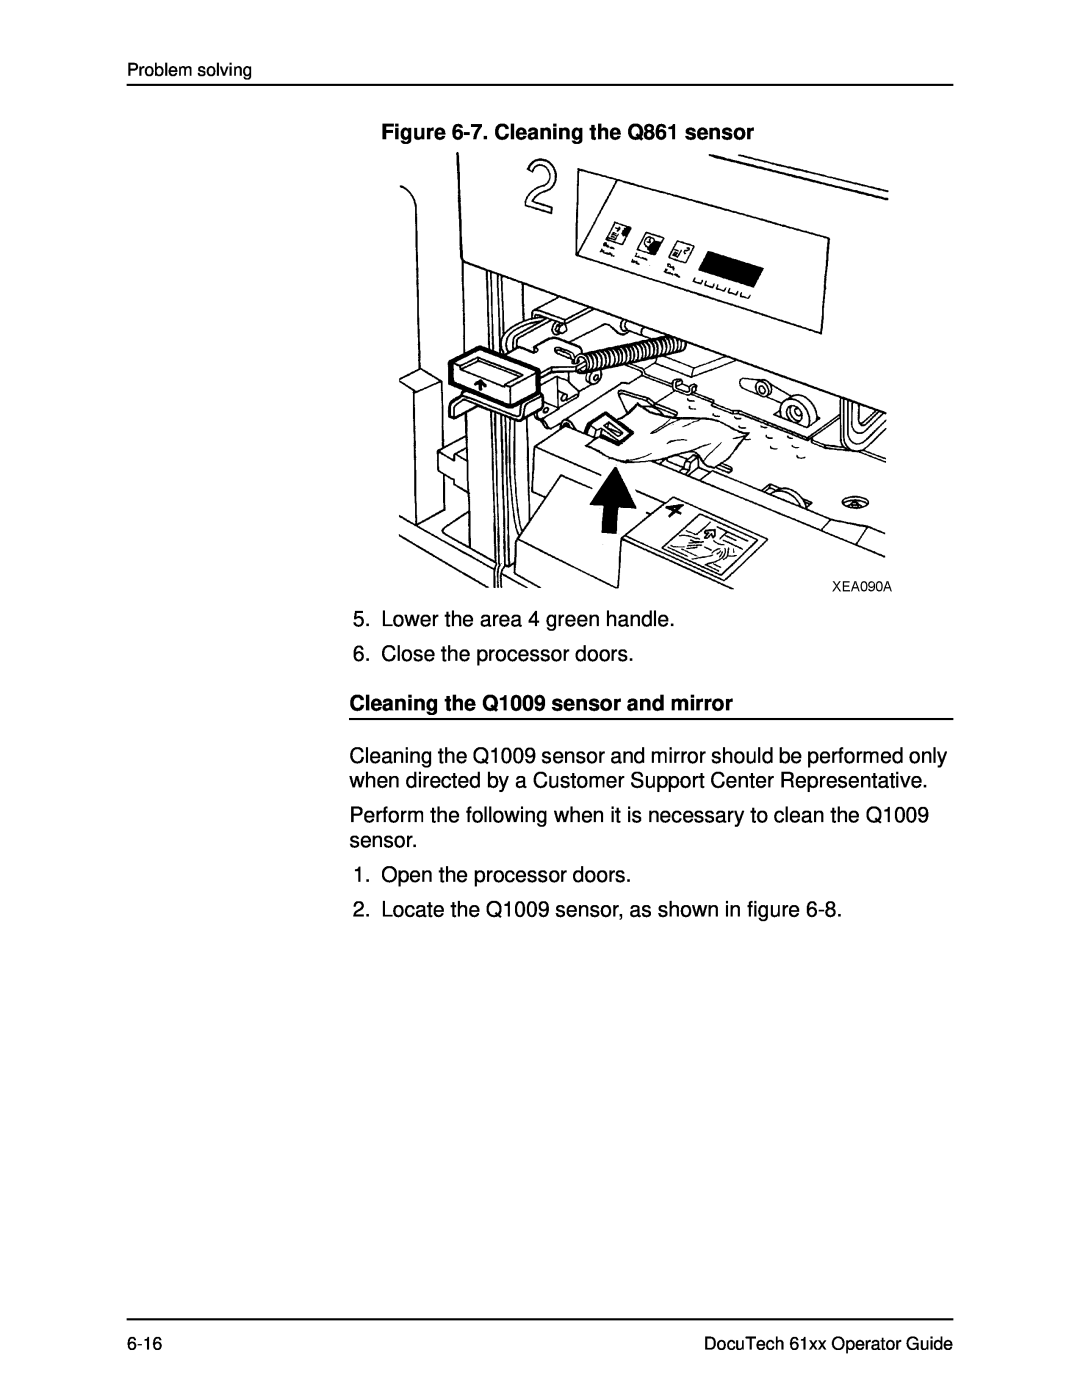 Xerox 61xx manual 7. Cleaning the Q861 sensor, Cleaning the Q1009 sensor and mirror 